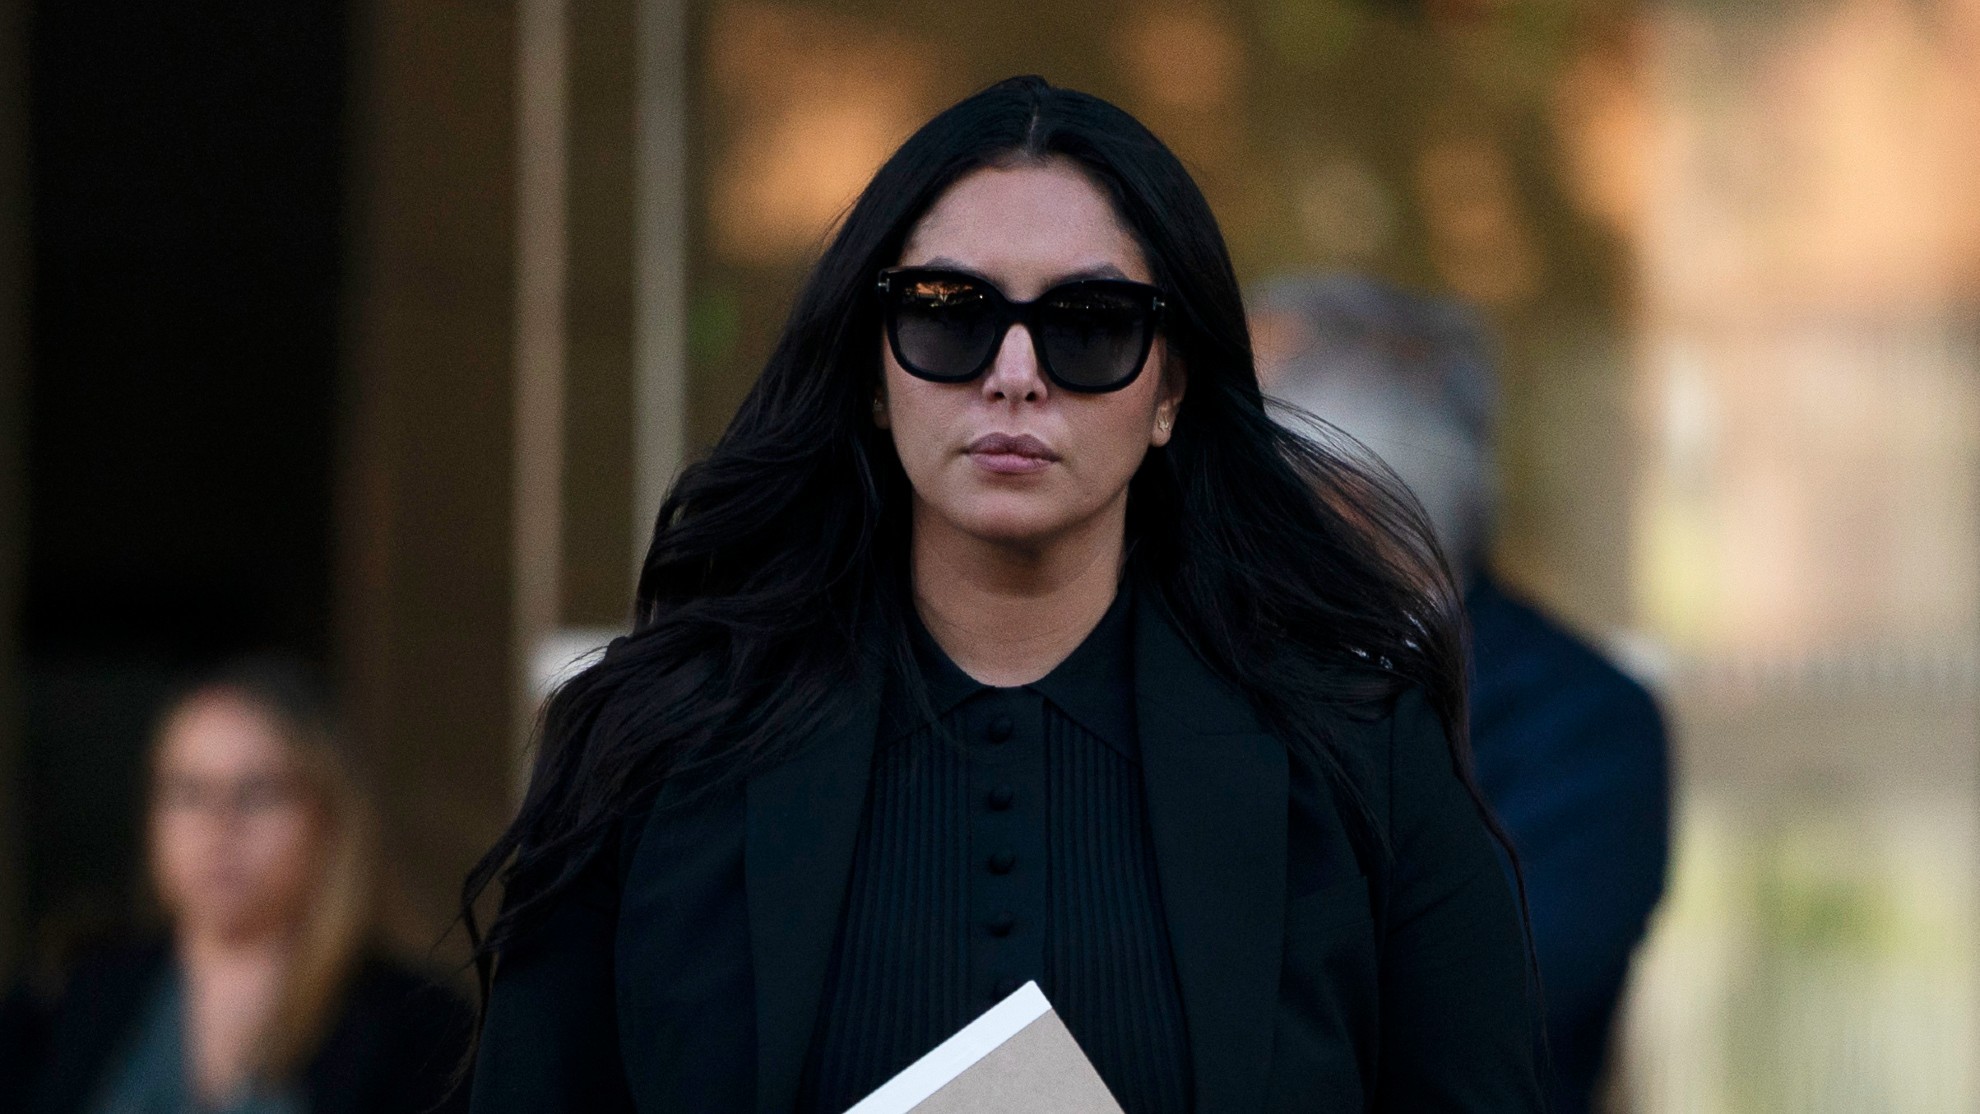 Vanessa Bryant, the widow of Kobe Bryant, leaves a federal courthouse in Los Angeles.